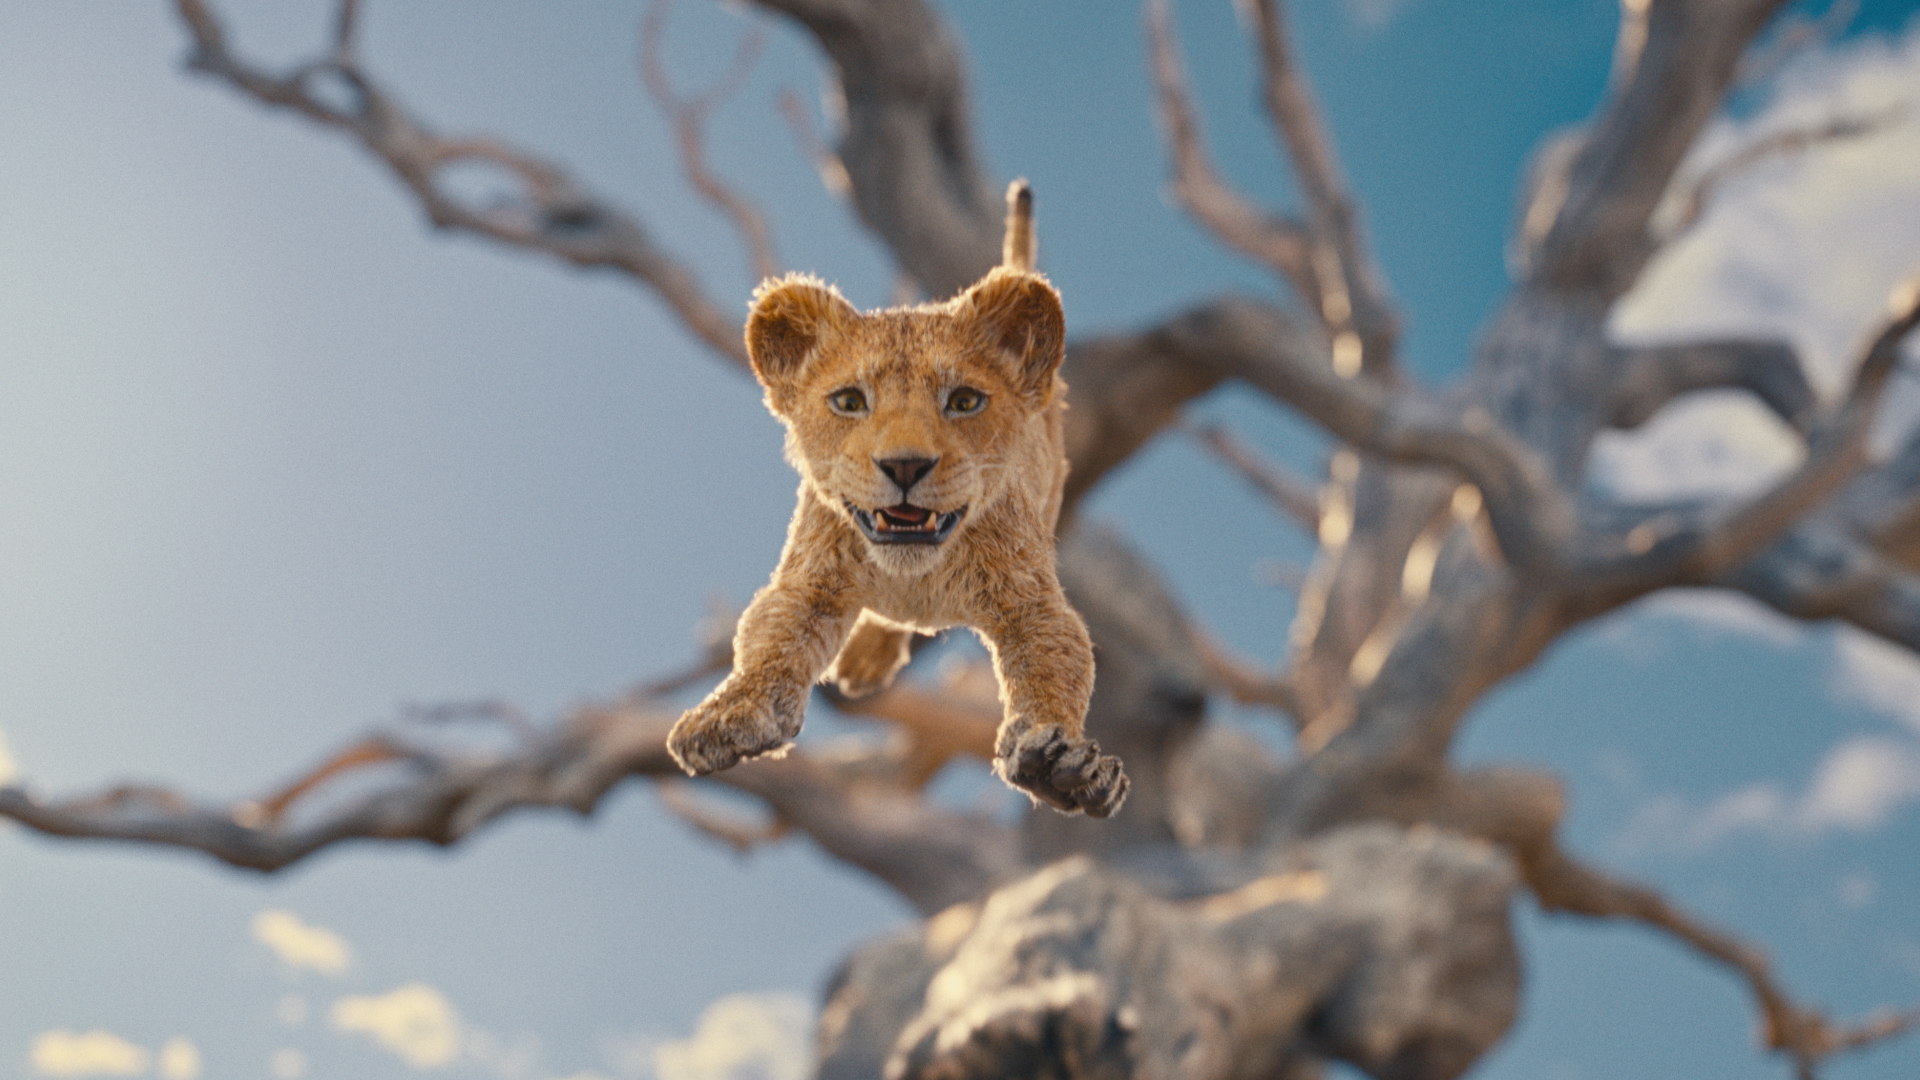 'Mufasa: The Lion King' Teaser Trailer Arrives, X Users React